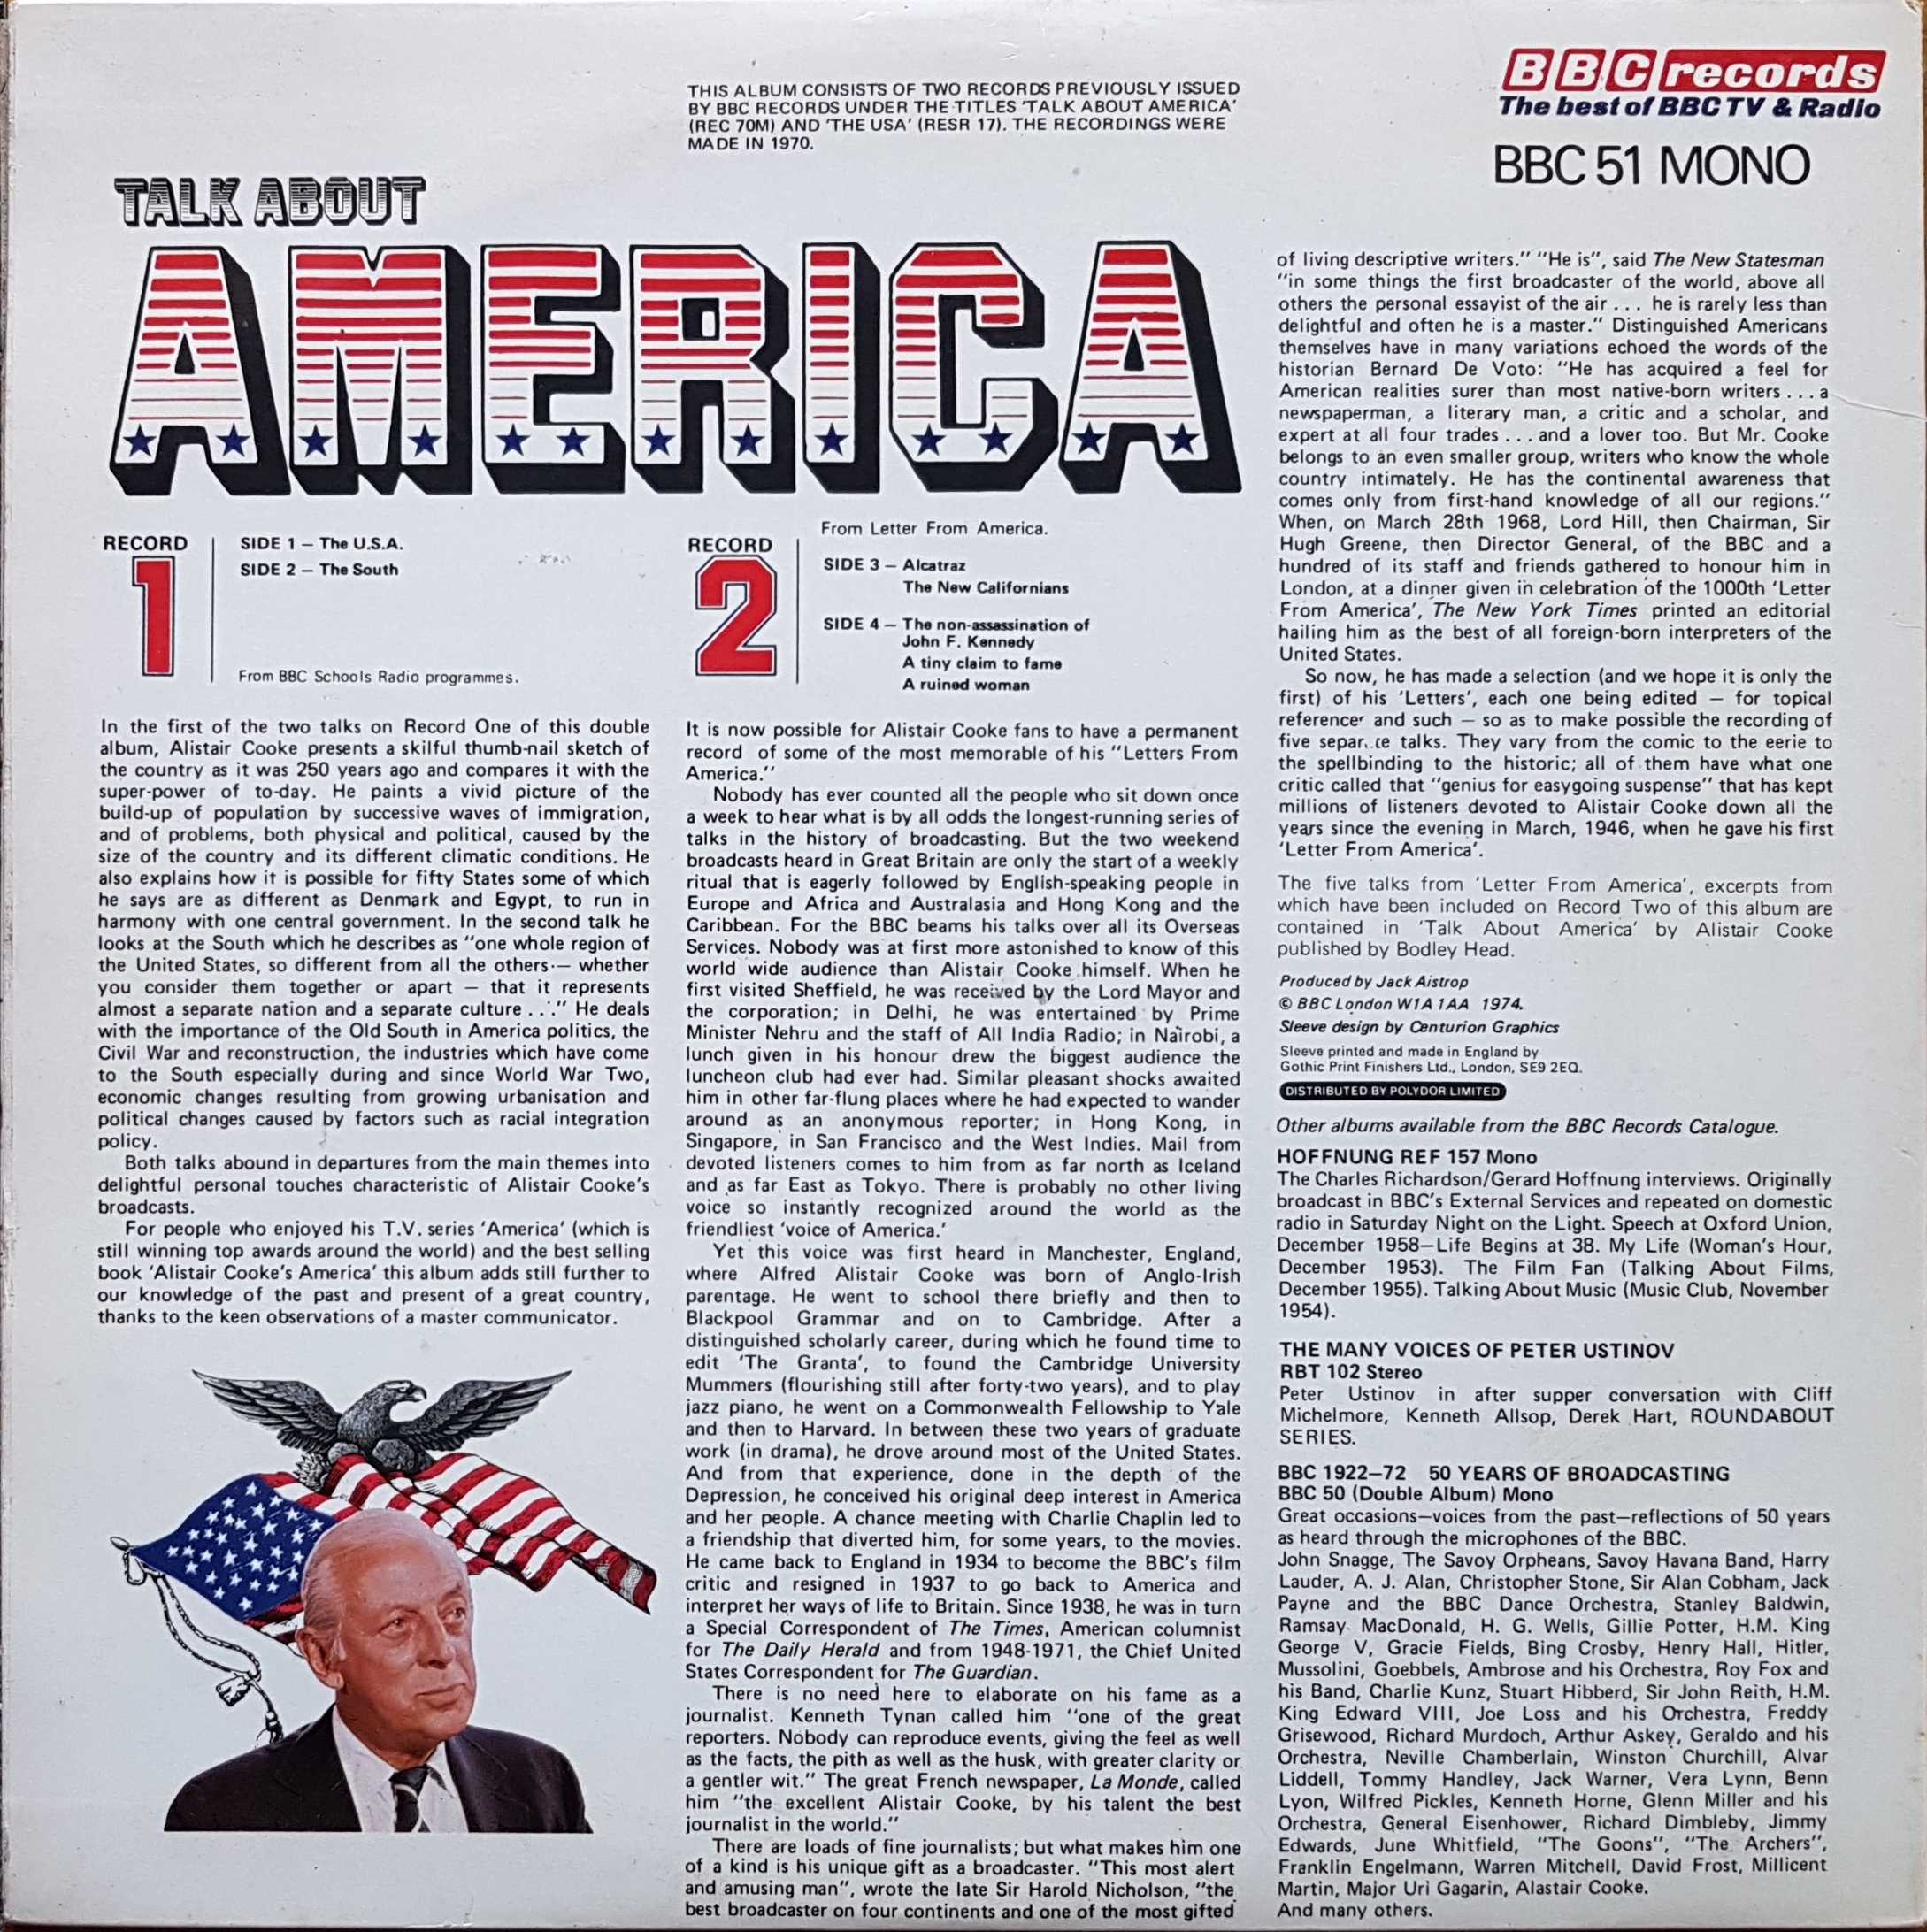 Picture of BBC 51 Talk about America by artist Alistair Cooke from the BBC records and Tapes library